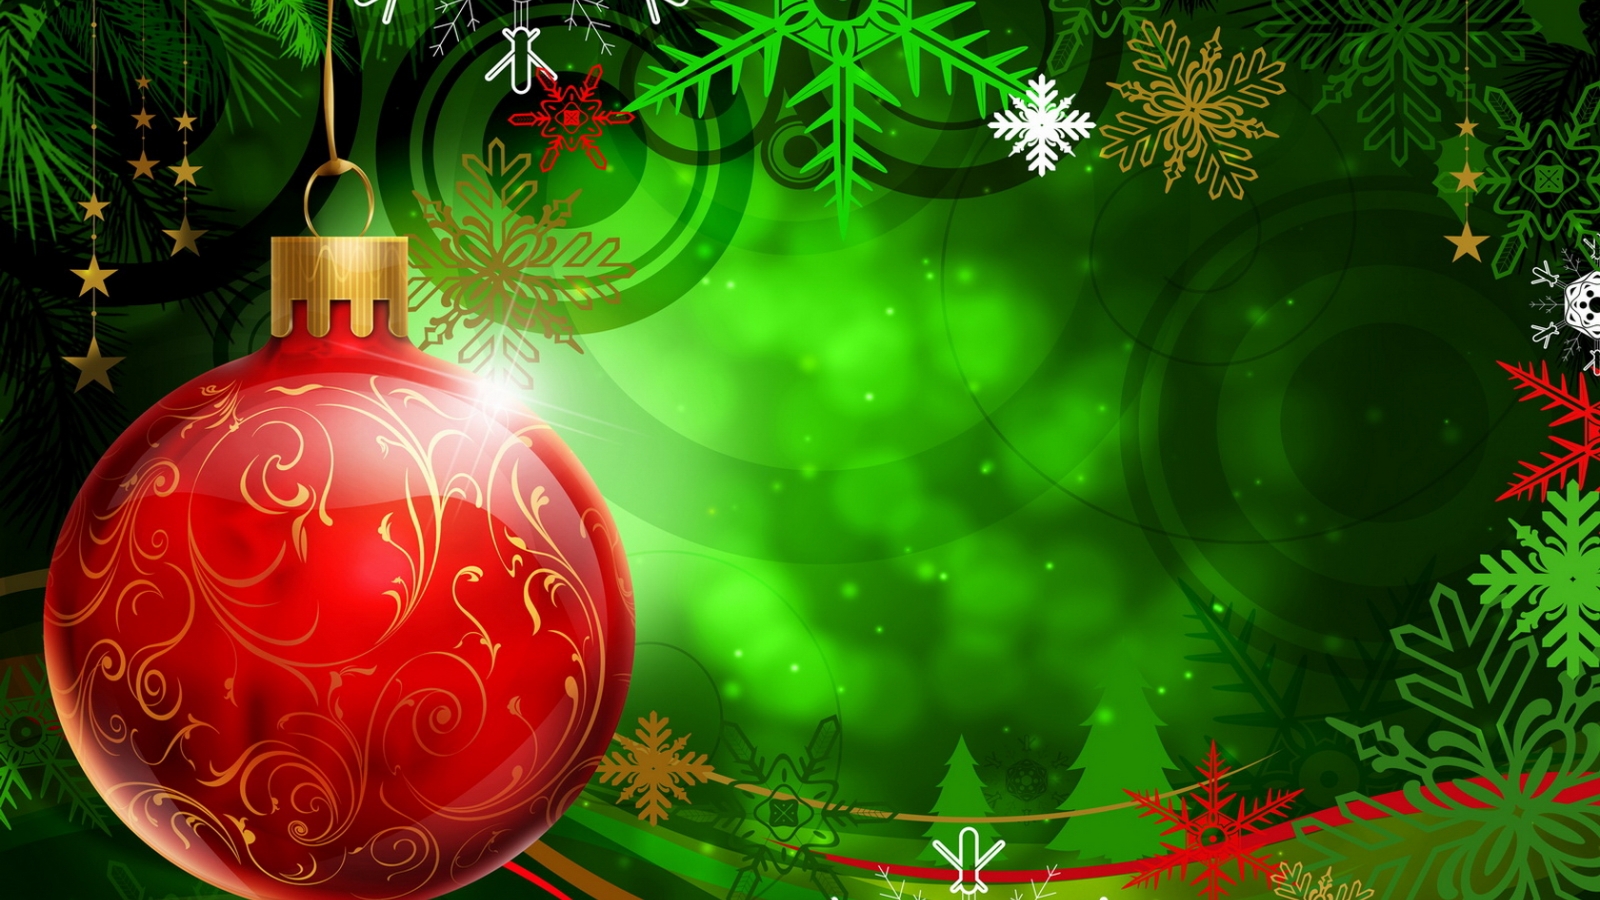 Wallpaper Android Live Christmas Wallpaper Android - Best Christmas Background Ever , HD Wallpaper & Backgrounds